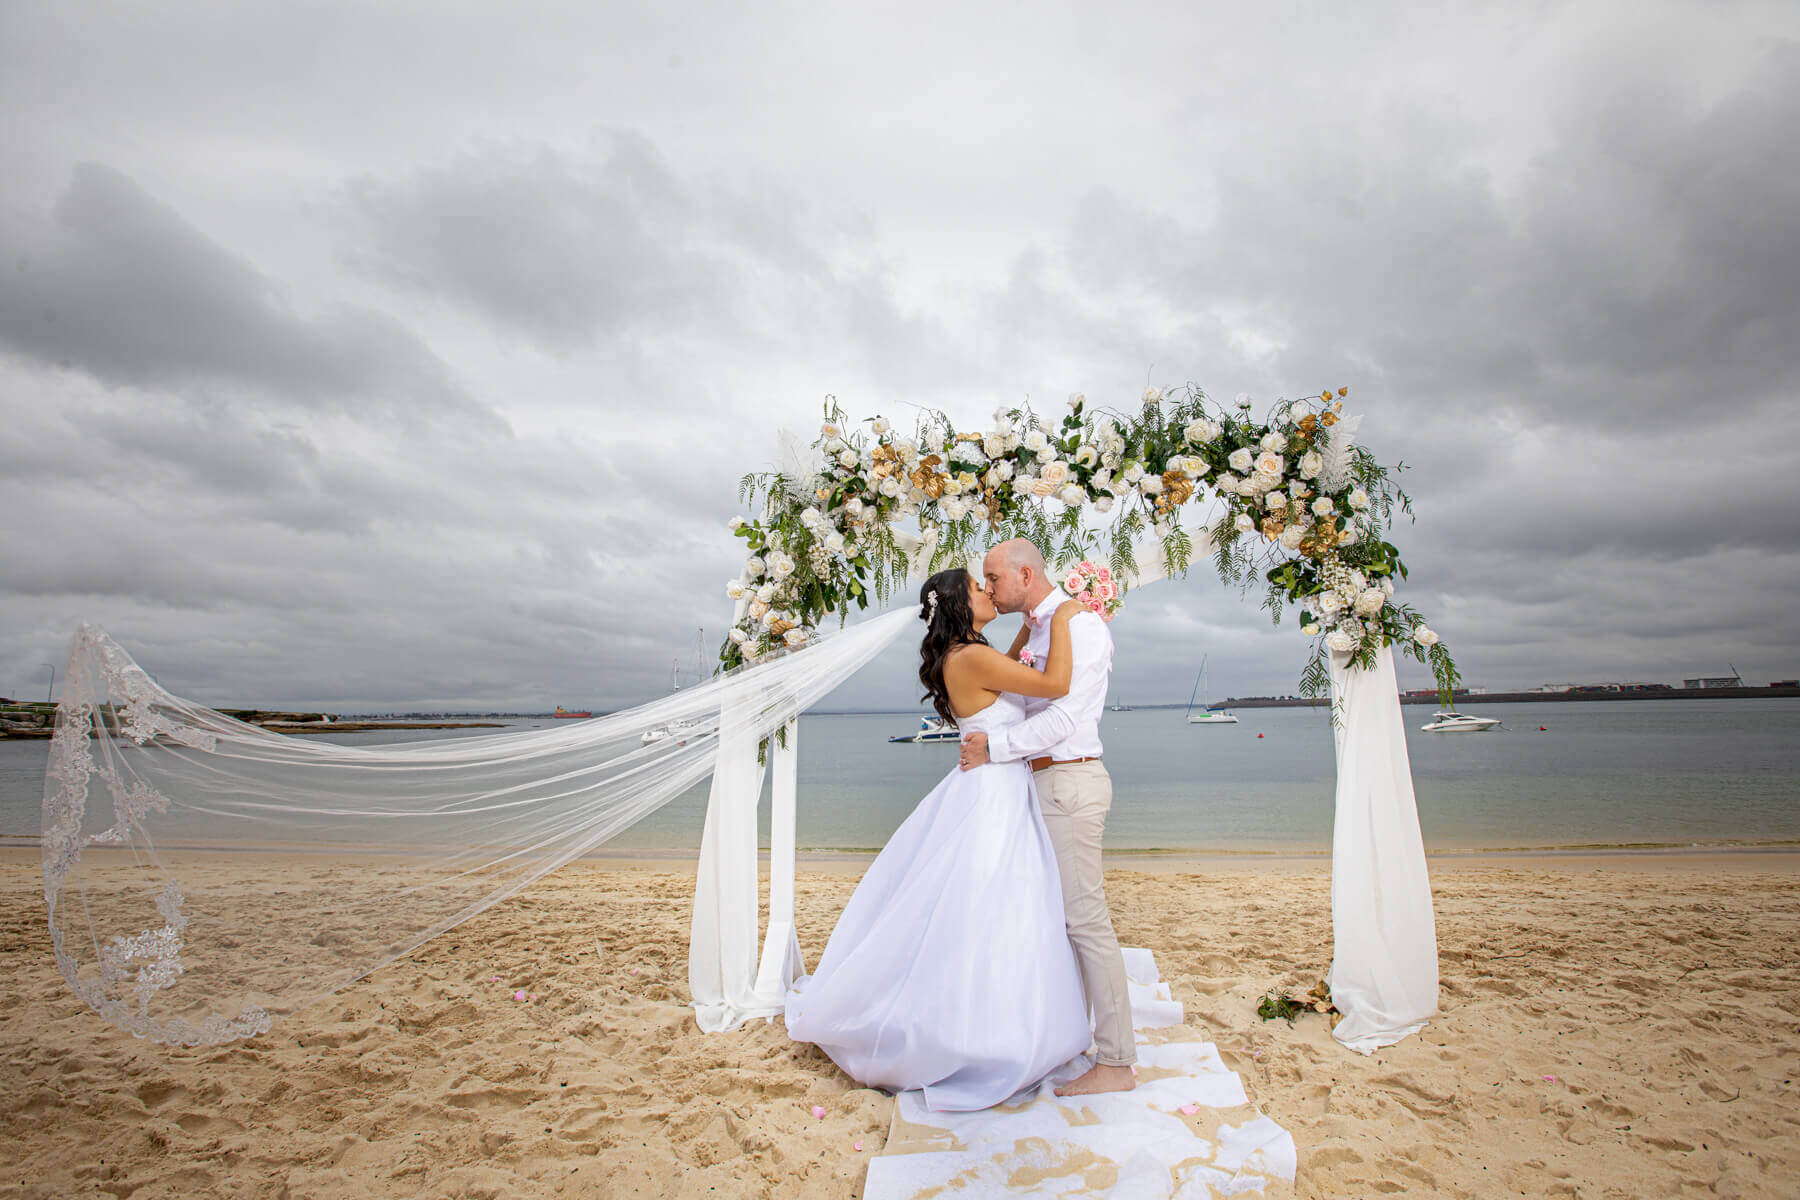 Beach wedding photography tips for beginners